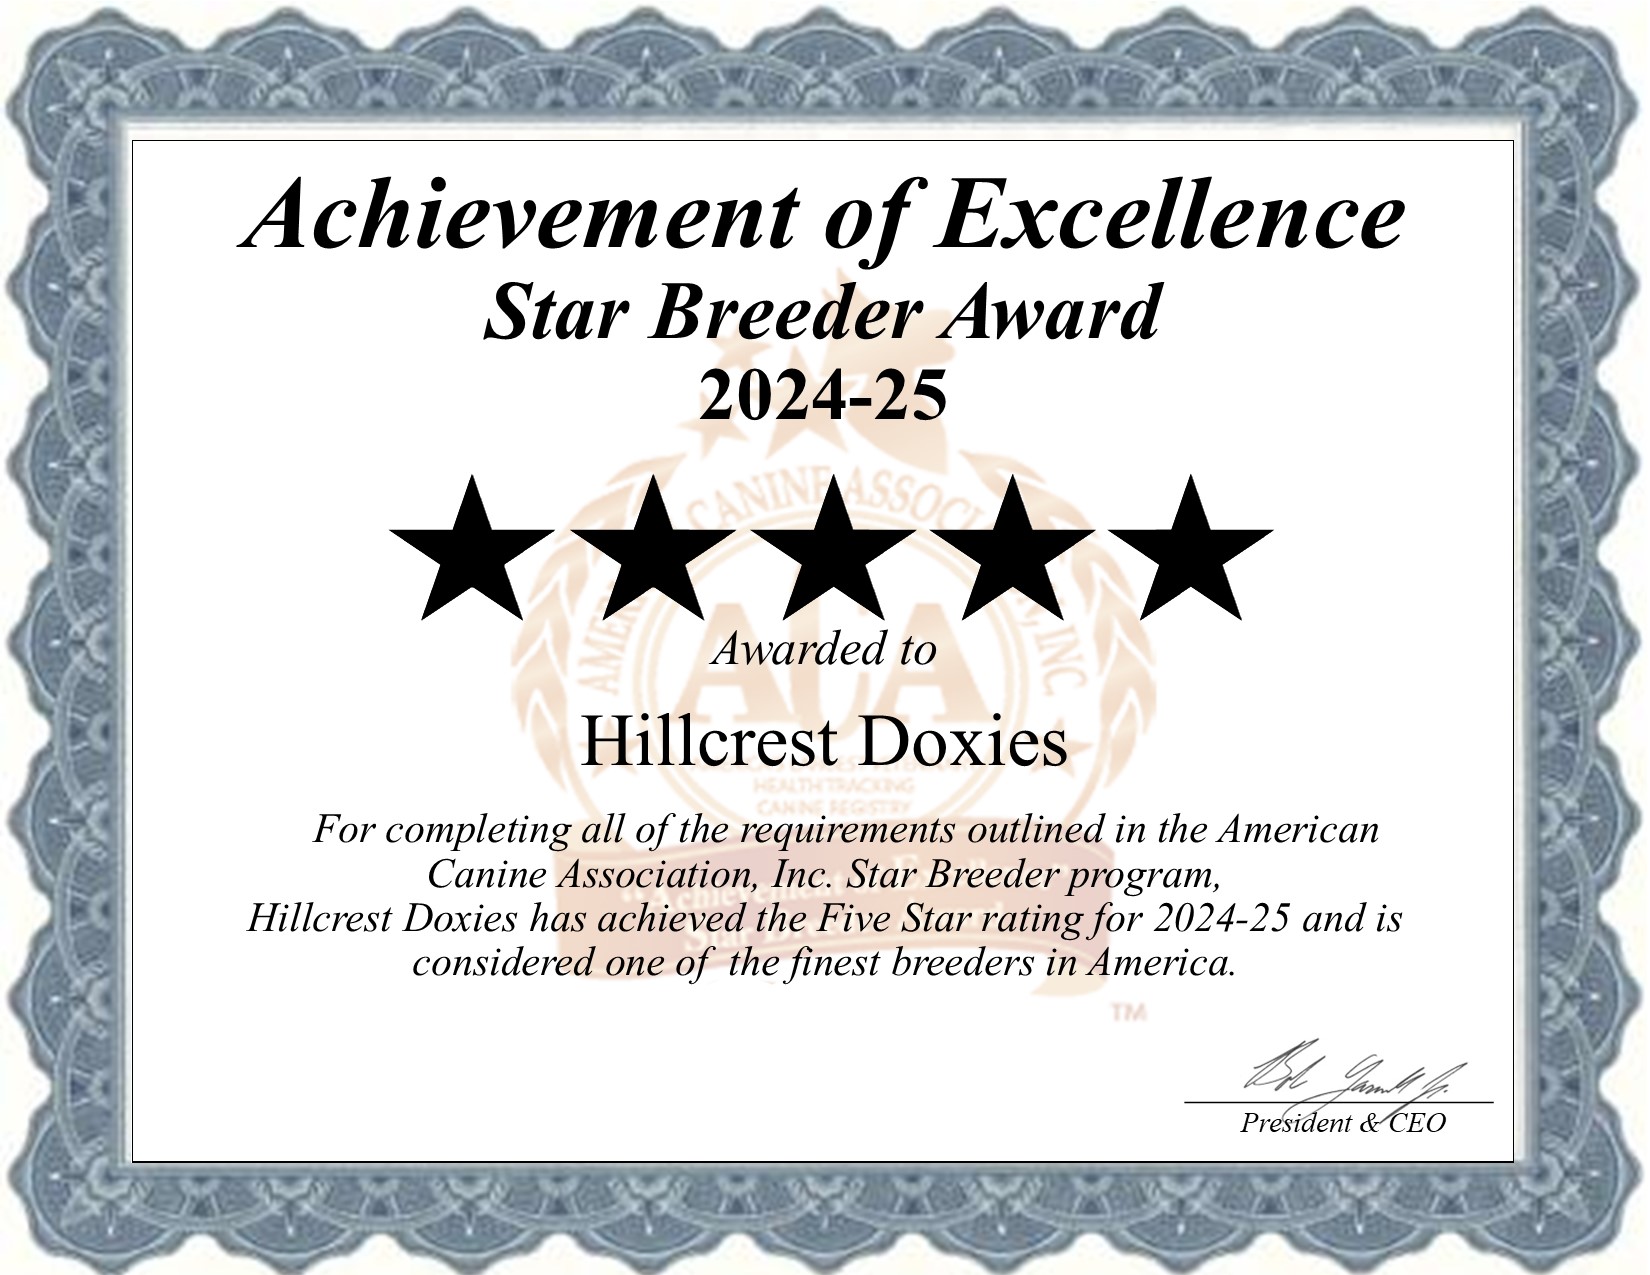 Hillcrest, Doxies, dog, breeder, star, certificate, Hillcrest-Doxies, Wolcott, NY, New York, puppy, dog, kennels, mill, puppymill, usda, 5-star, aca, ica, registered, Dachshund, none